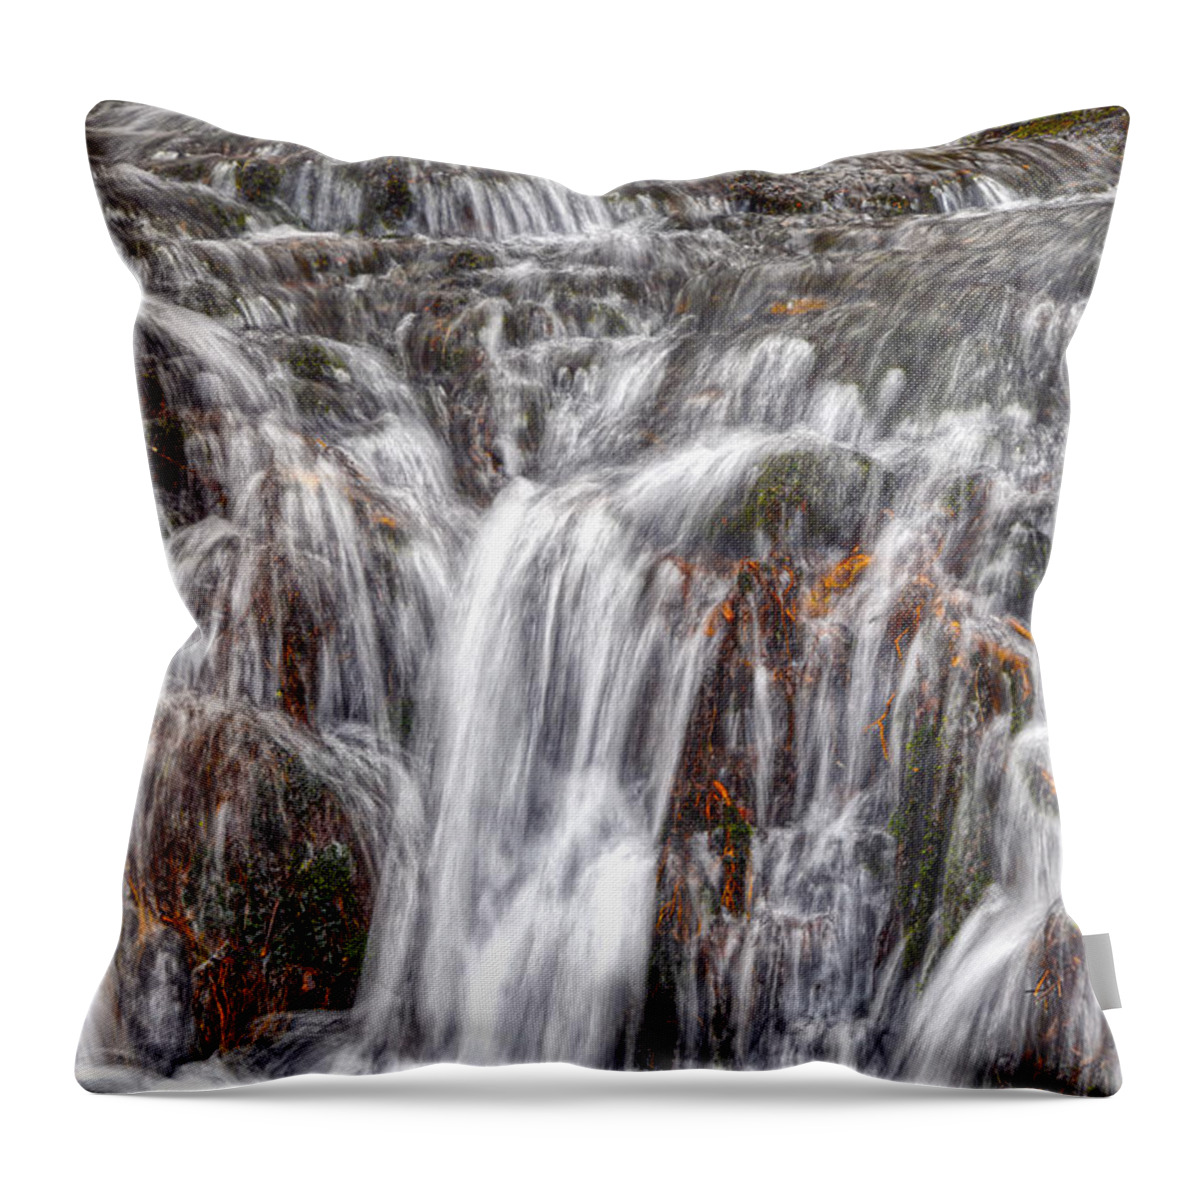 Waterfalls Throw Pillow featuring the photograph Small Waterfalls 3 by Phil Perkins